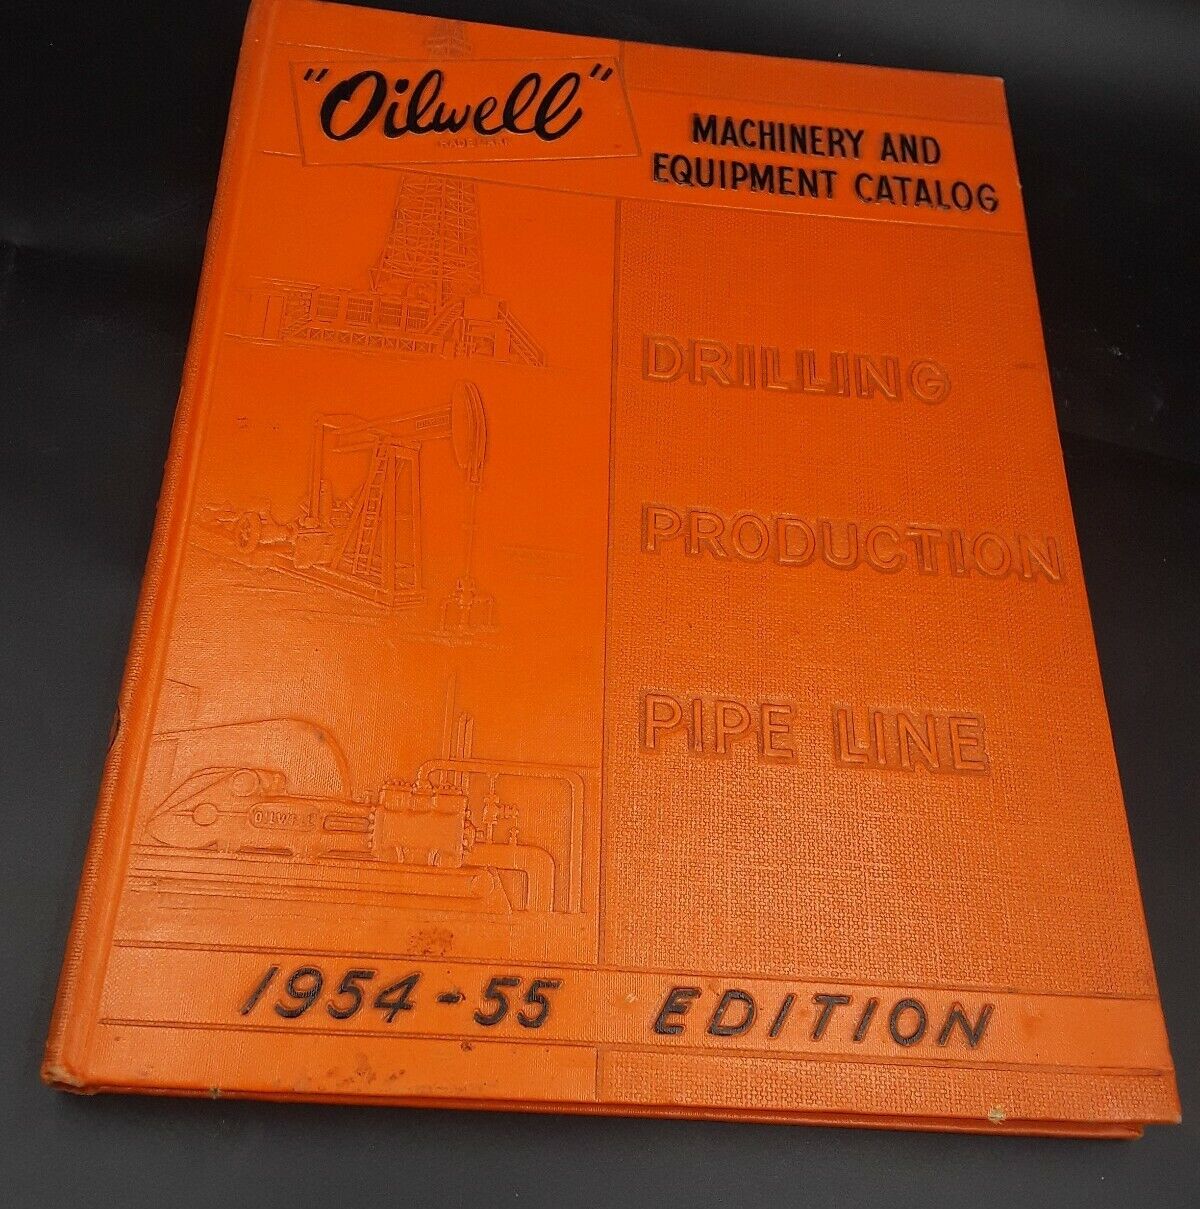 Oilwell  Catalog 1954-55 Edition Hardcover book Vtg Machinery and Equipment